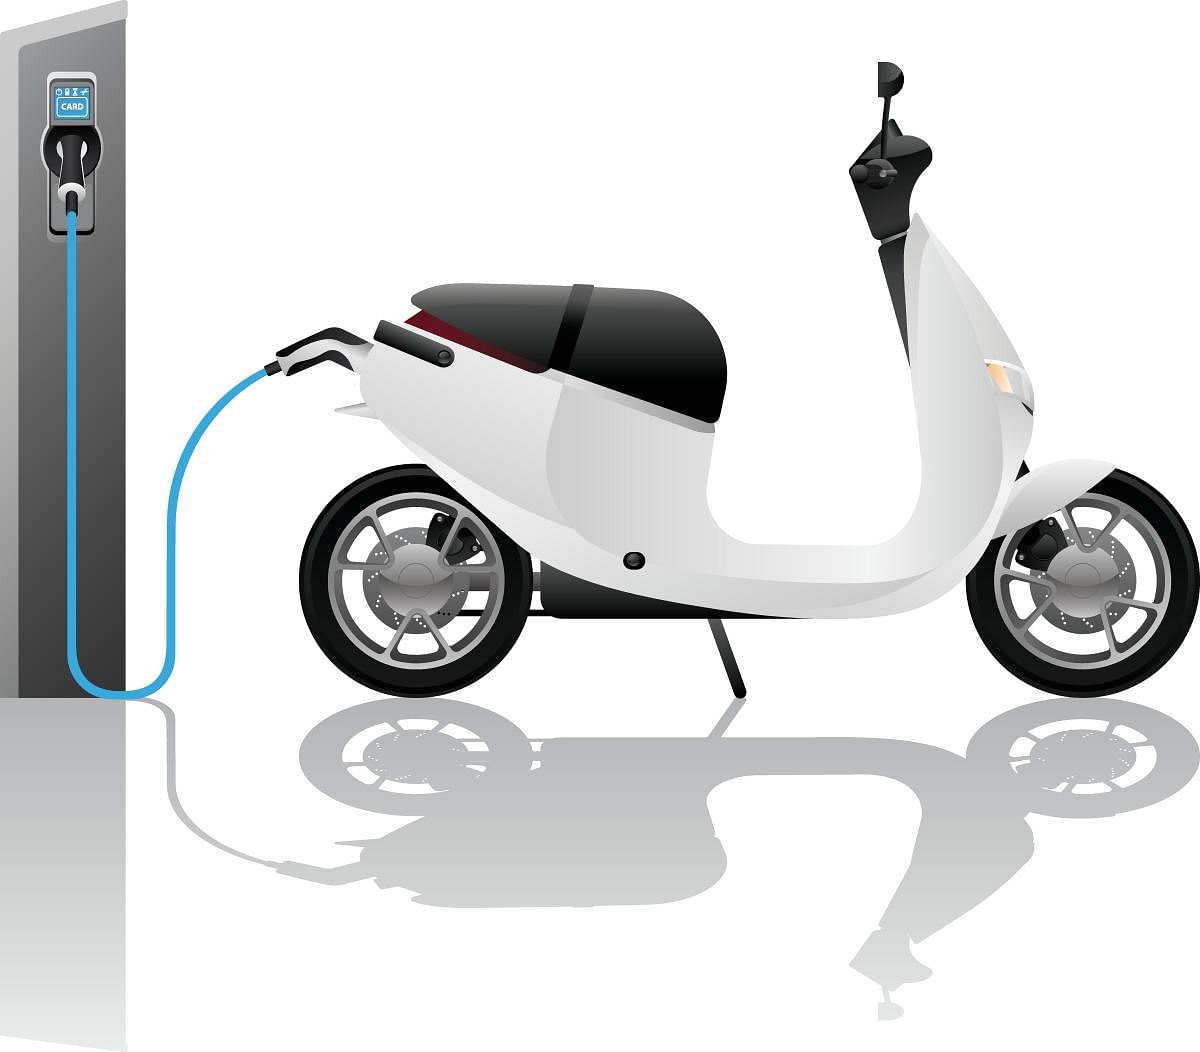 Electric scooter for sharing